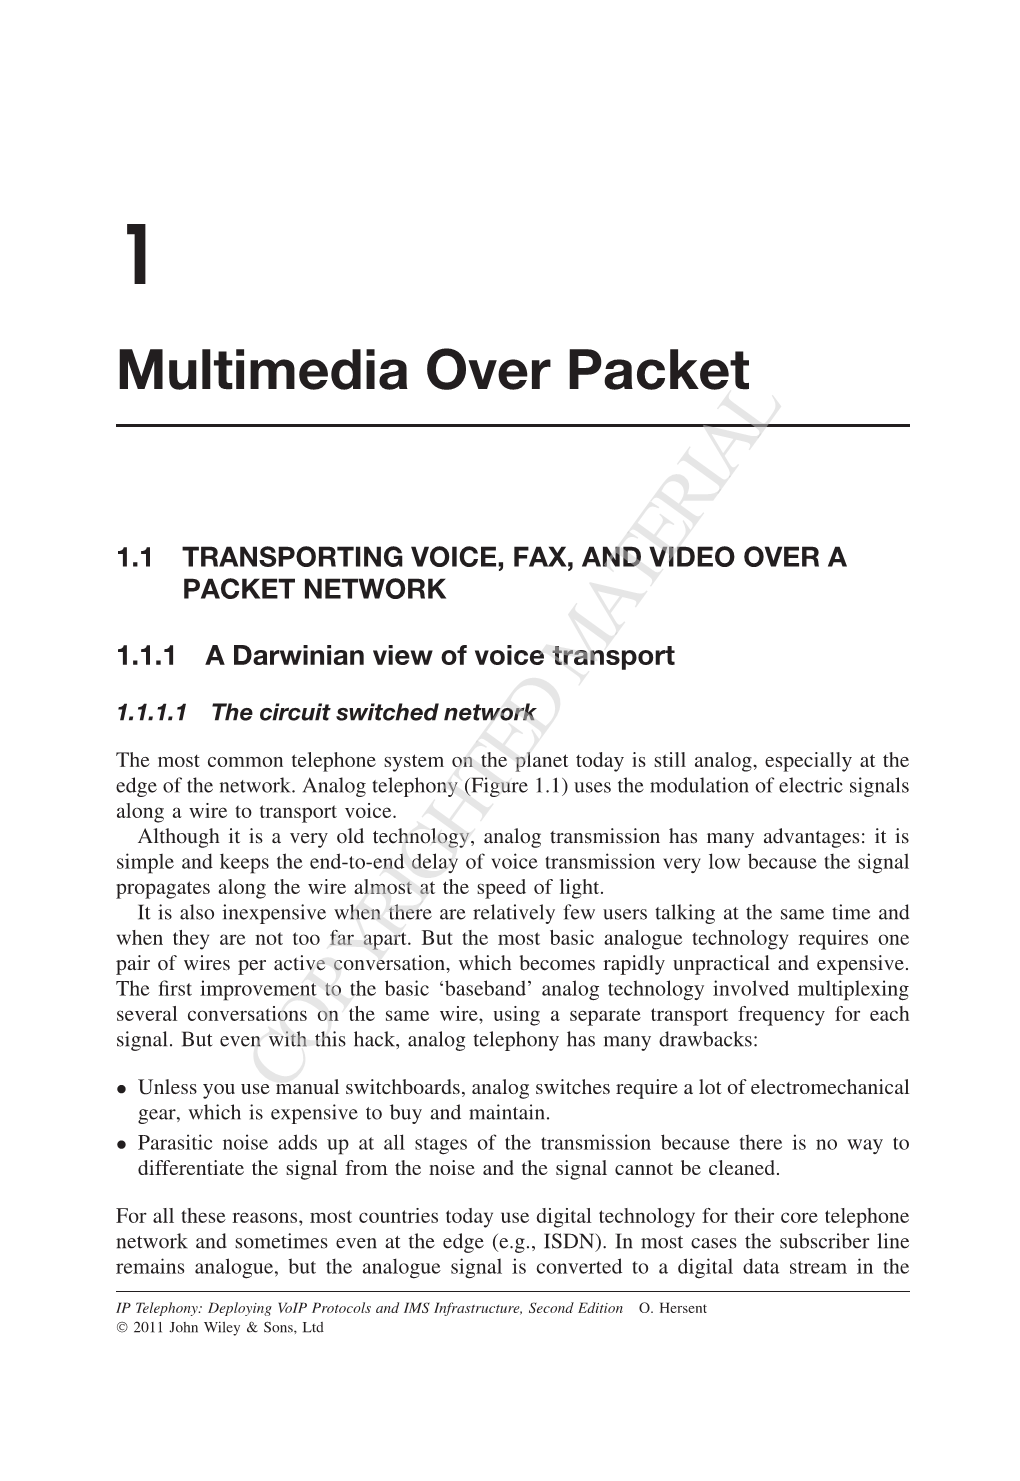 Multimedia Over Packet